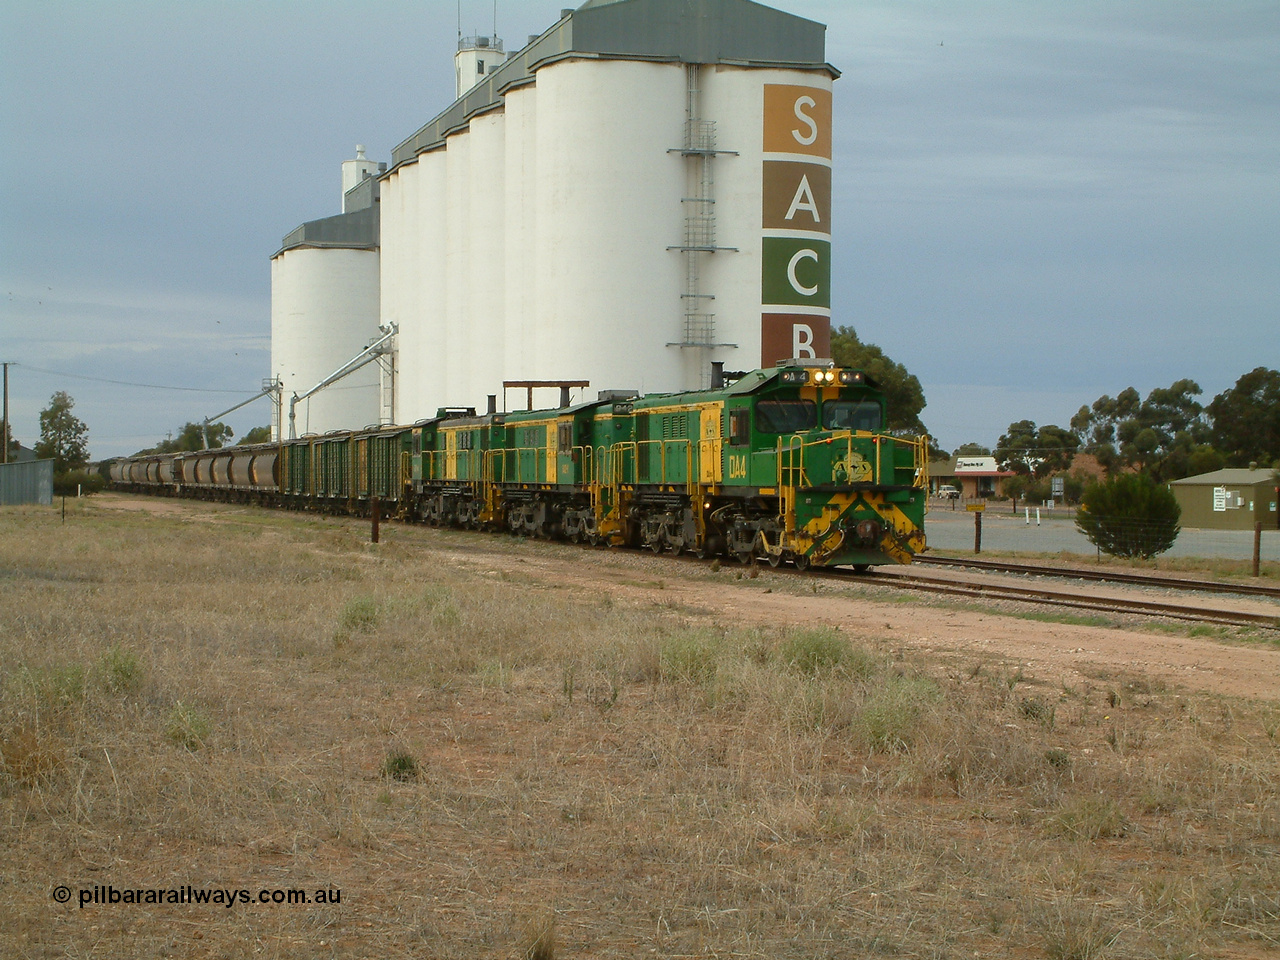 030407 082231
Wudinna, north bound empty grain train arrives behind a trio of former Australian National locomotives with rebuilt former AE Goodwin ALCo model DL531 830 class ex 839, serial 83730, rebuilt by Port Augusta Workshops to DA class, DA 4 leading two AE Goodwin ALCo model DL531 830 class units 842, serial 84140 and 851 serial 84137, 851 having been on the Eyre Peninsula since delivered in 1962, to shunt off empty waggons into the grain siding. 7th April 2003.
Keywords: DA-class;DA4;83730;Port-Augusta-WS;ALCo;DL531G/1;830-class;839;rebuild;